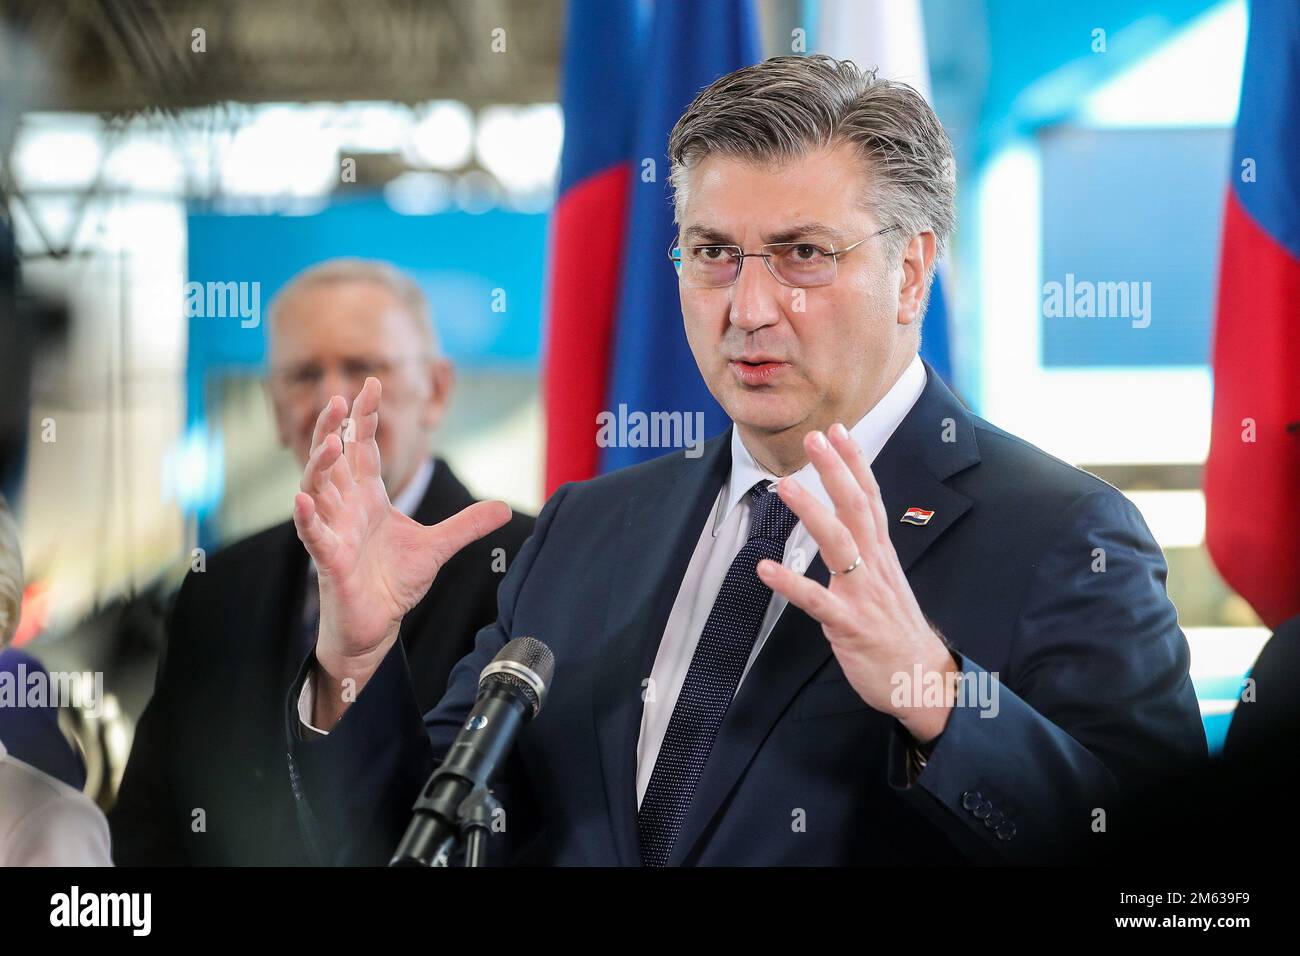 (230102) -- BREGANA, Jan. 2, 2023 (Xinhua) -- Croatian Prime Minister Andrej Plenkovic speaks to the media at the Bregana border crossing between Croatia and Slovenia, Jan. 1, 2023. Ursula von der Leyen, president of the European Commission, visited Croatia on New Year's day to mark the country's entry into the eurozone and the border-free Schengen area.Various activities were held at border crossings with Slovenia and Hungary on early Sunday morning to celebrate the historic moment. (Luka Stanzl/PIXSELL via Xinhua) Stock Photo